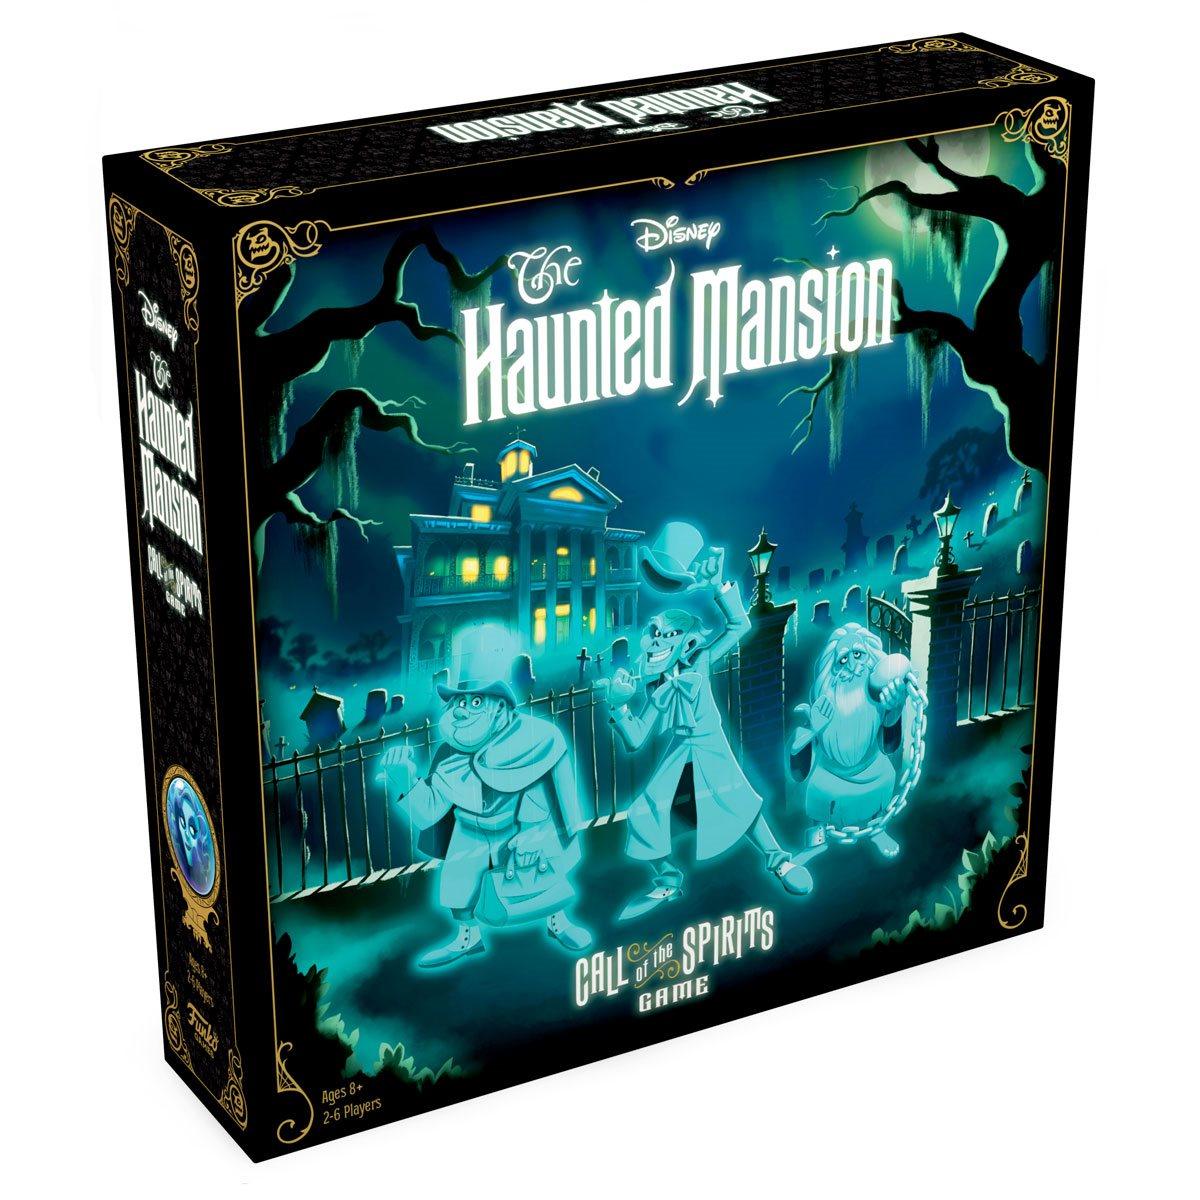 Disney's The Haunted Mansion Game - Emmett's ToyStop